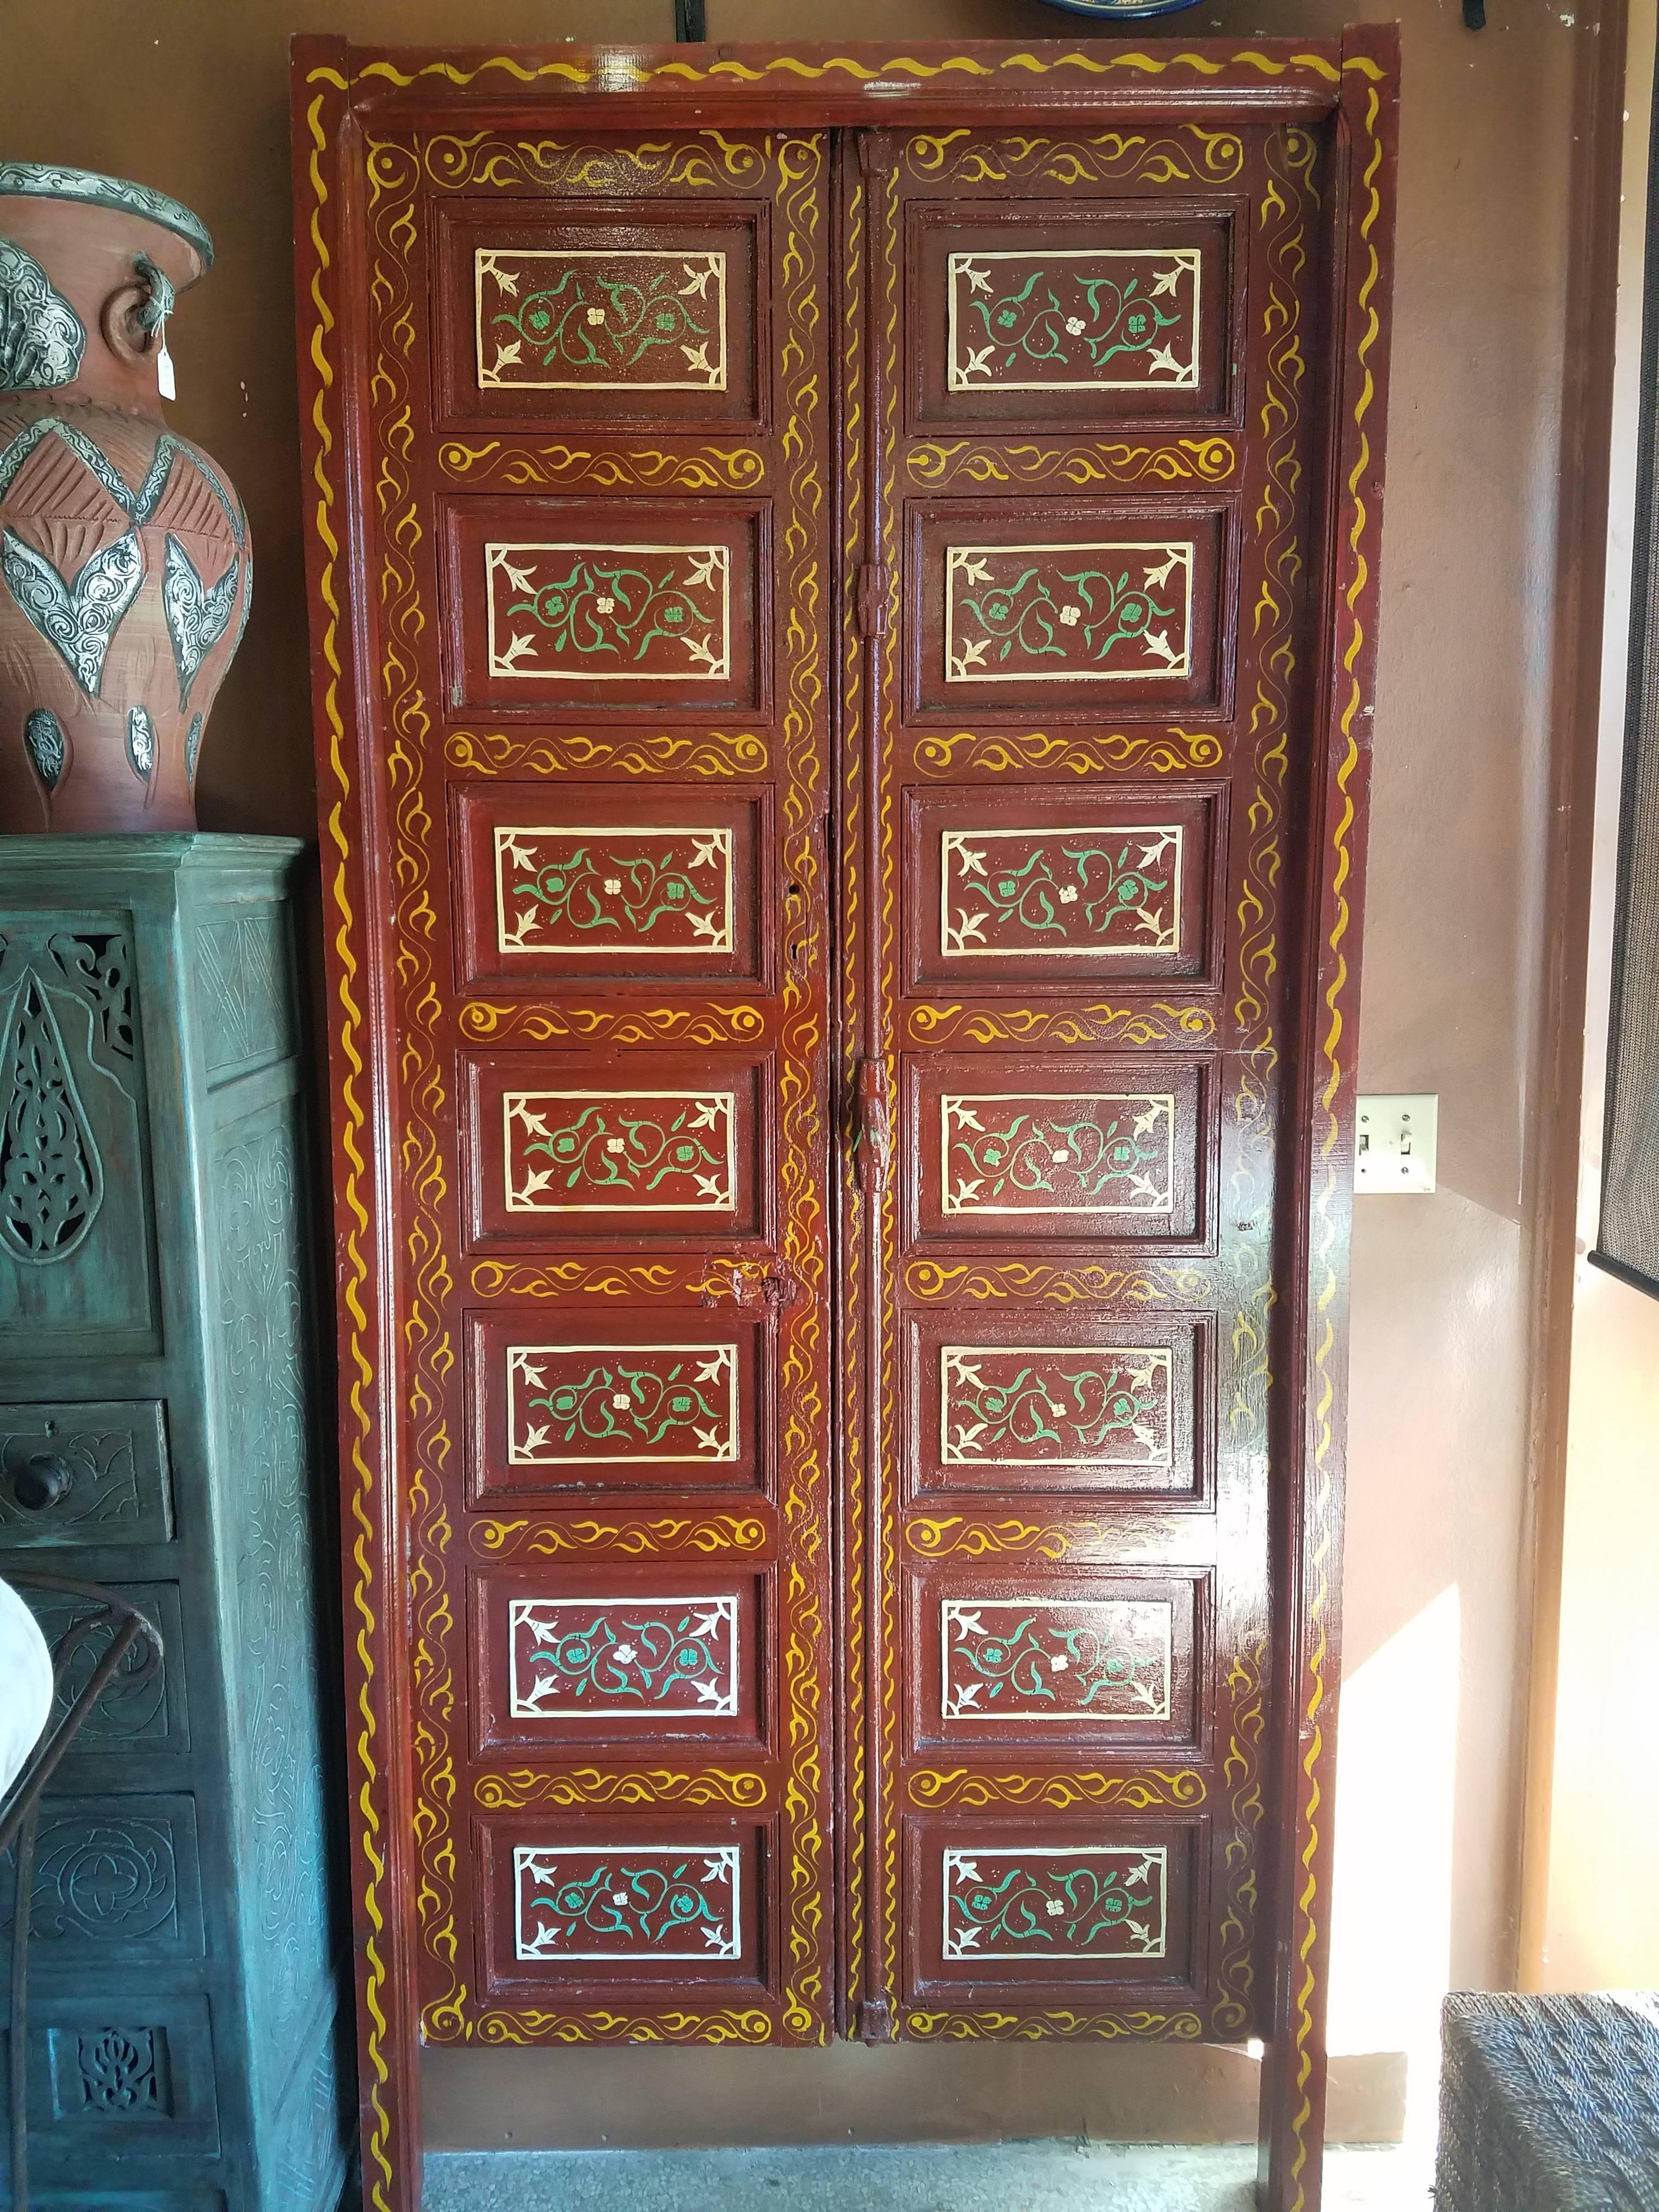 This handmade / hand-painted Moroccan wooden door measures approximately 95? in height by 43? in width. Great as a decorative piece, or to use as a functional door. Made of local (Moroccan) cedar wood.
      
      